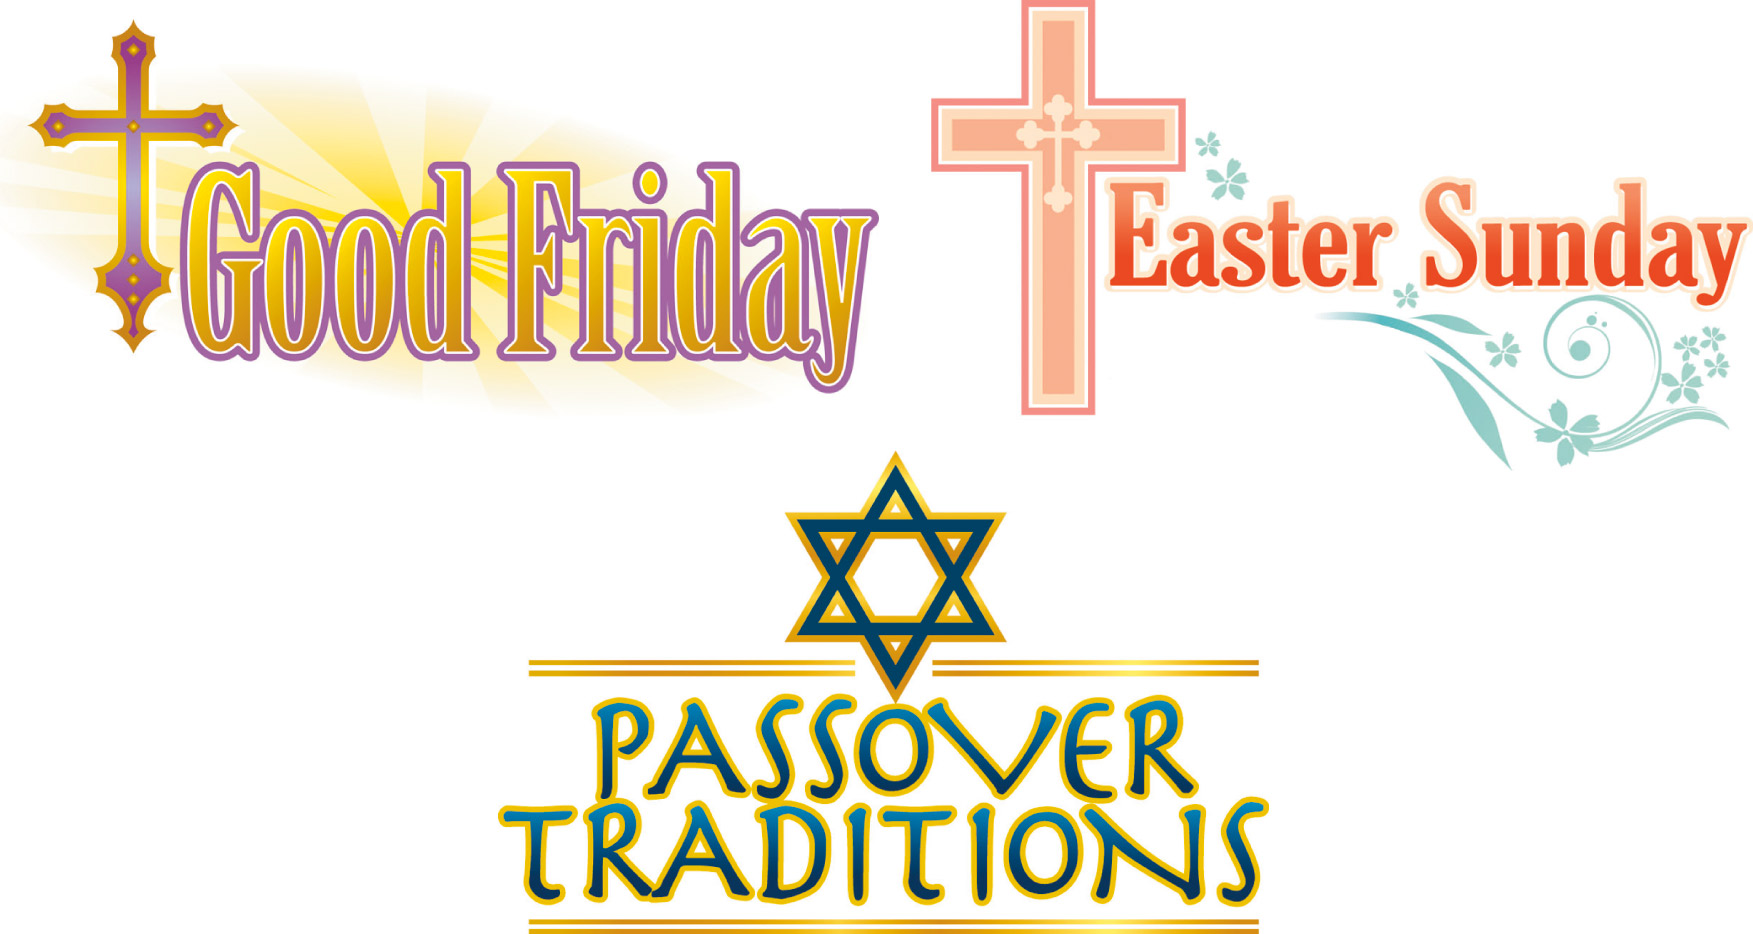 christian easter clipart free download - photo #20